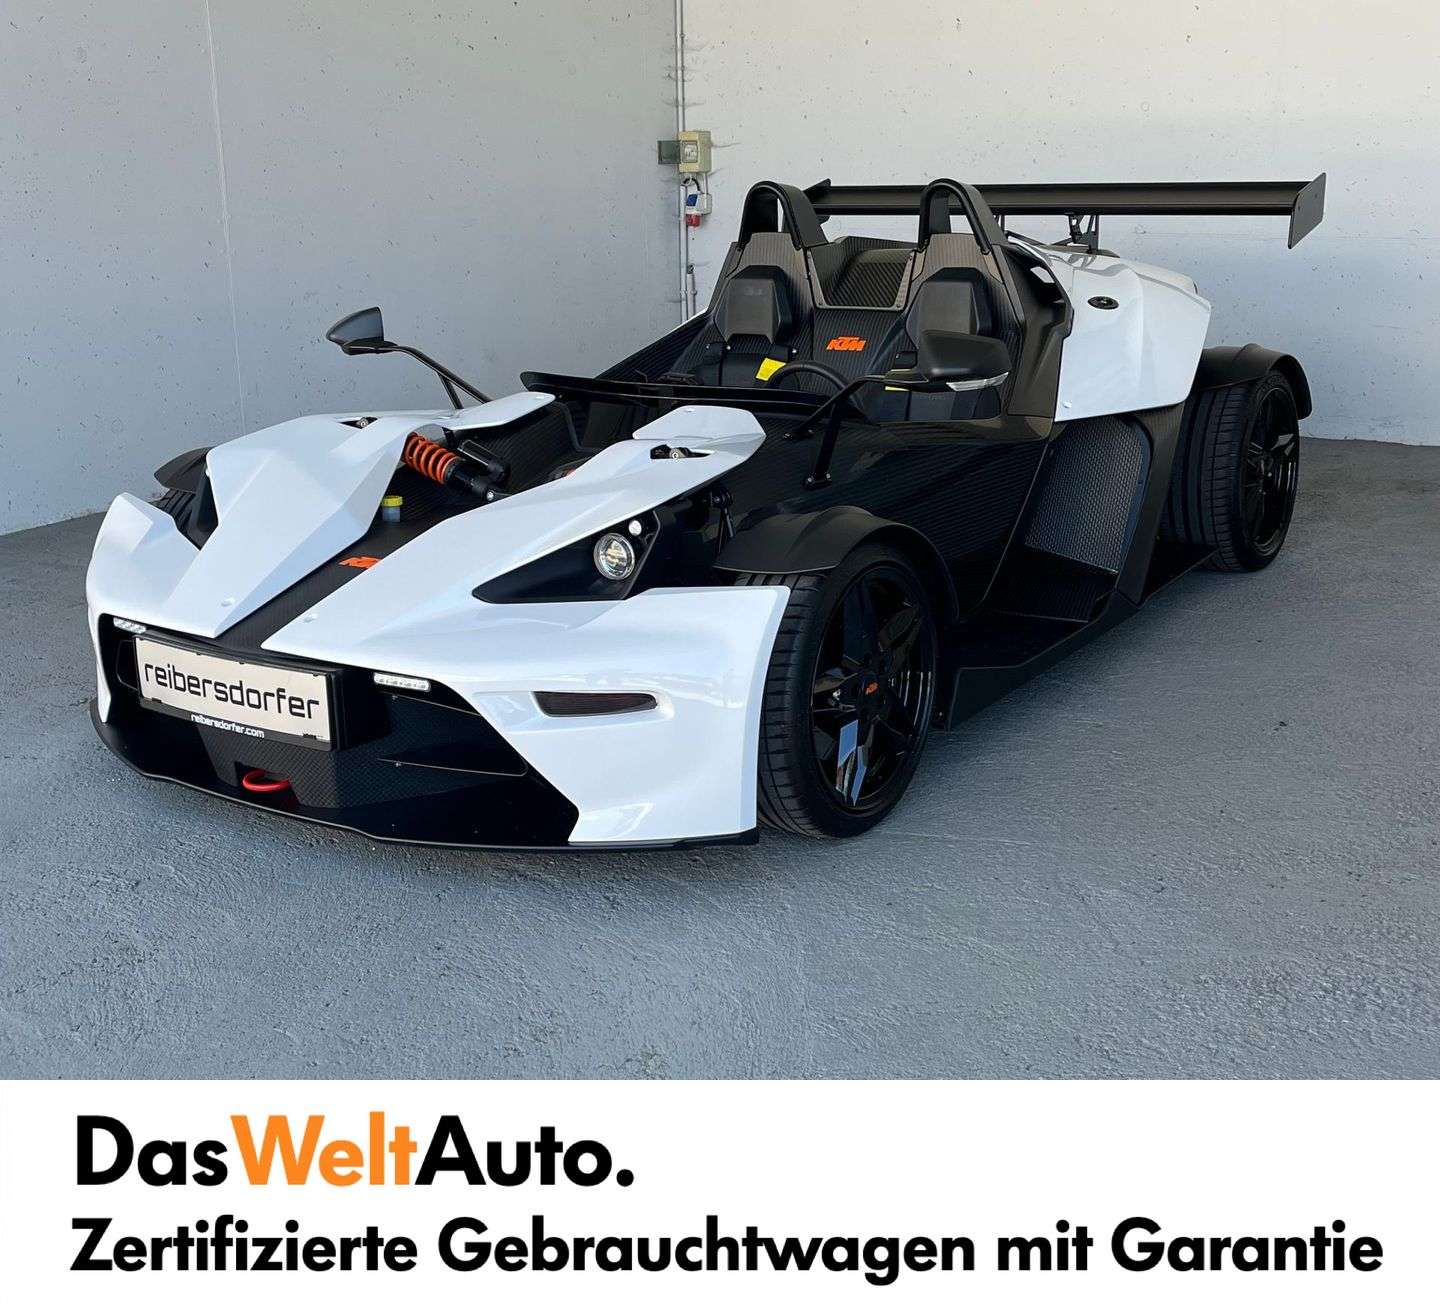 KTM X-Bow R Convertible in White used in Mattighofen for € 170,000.-